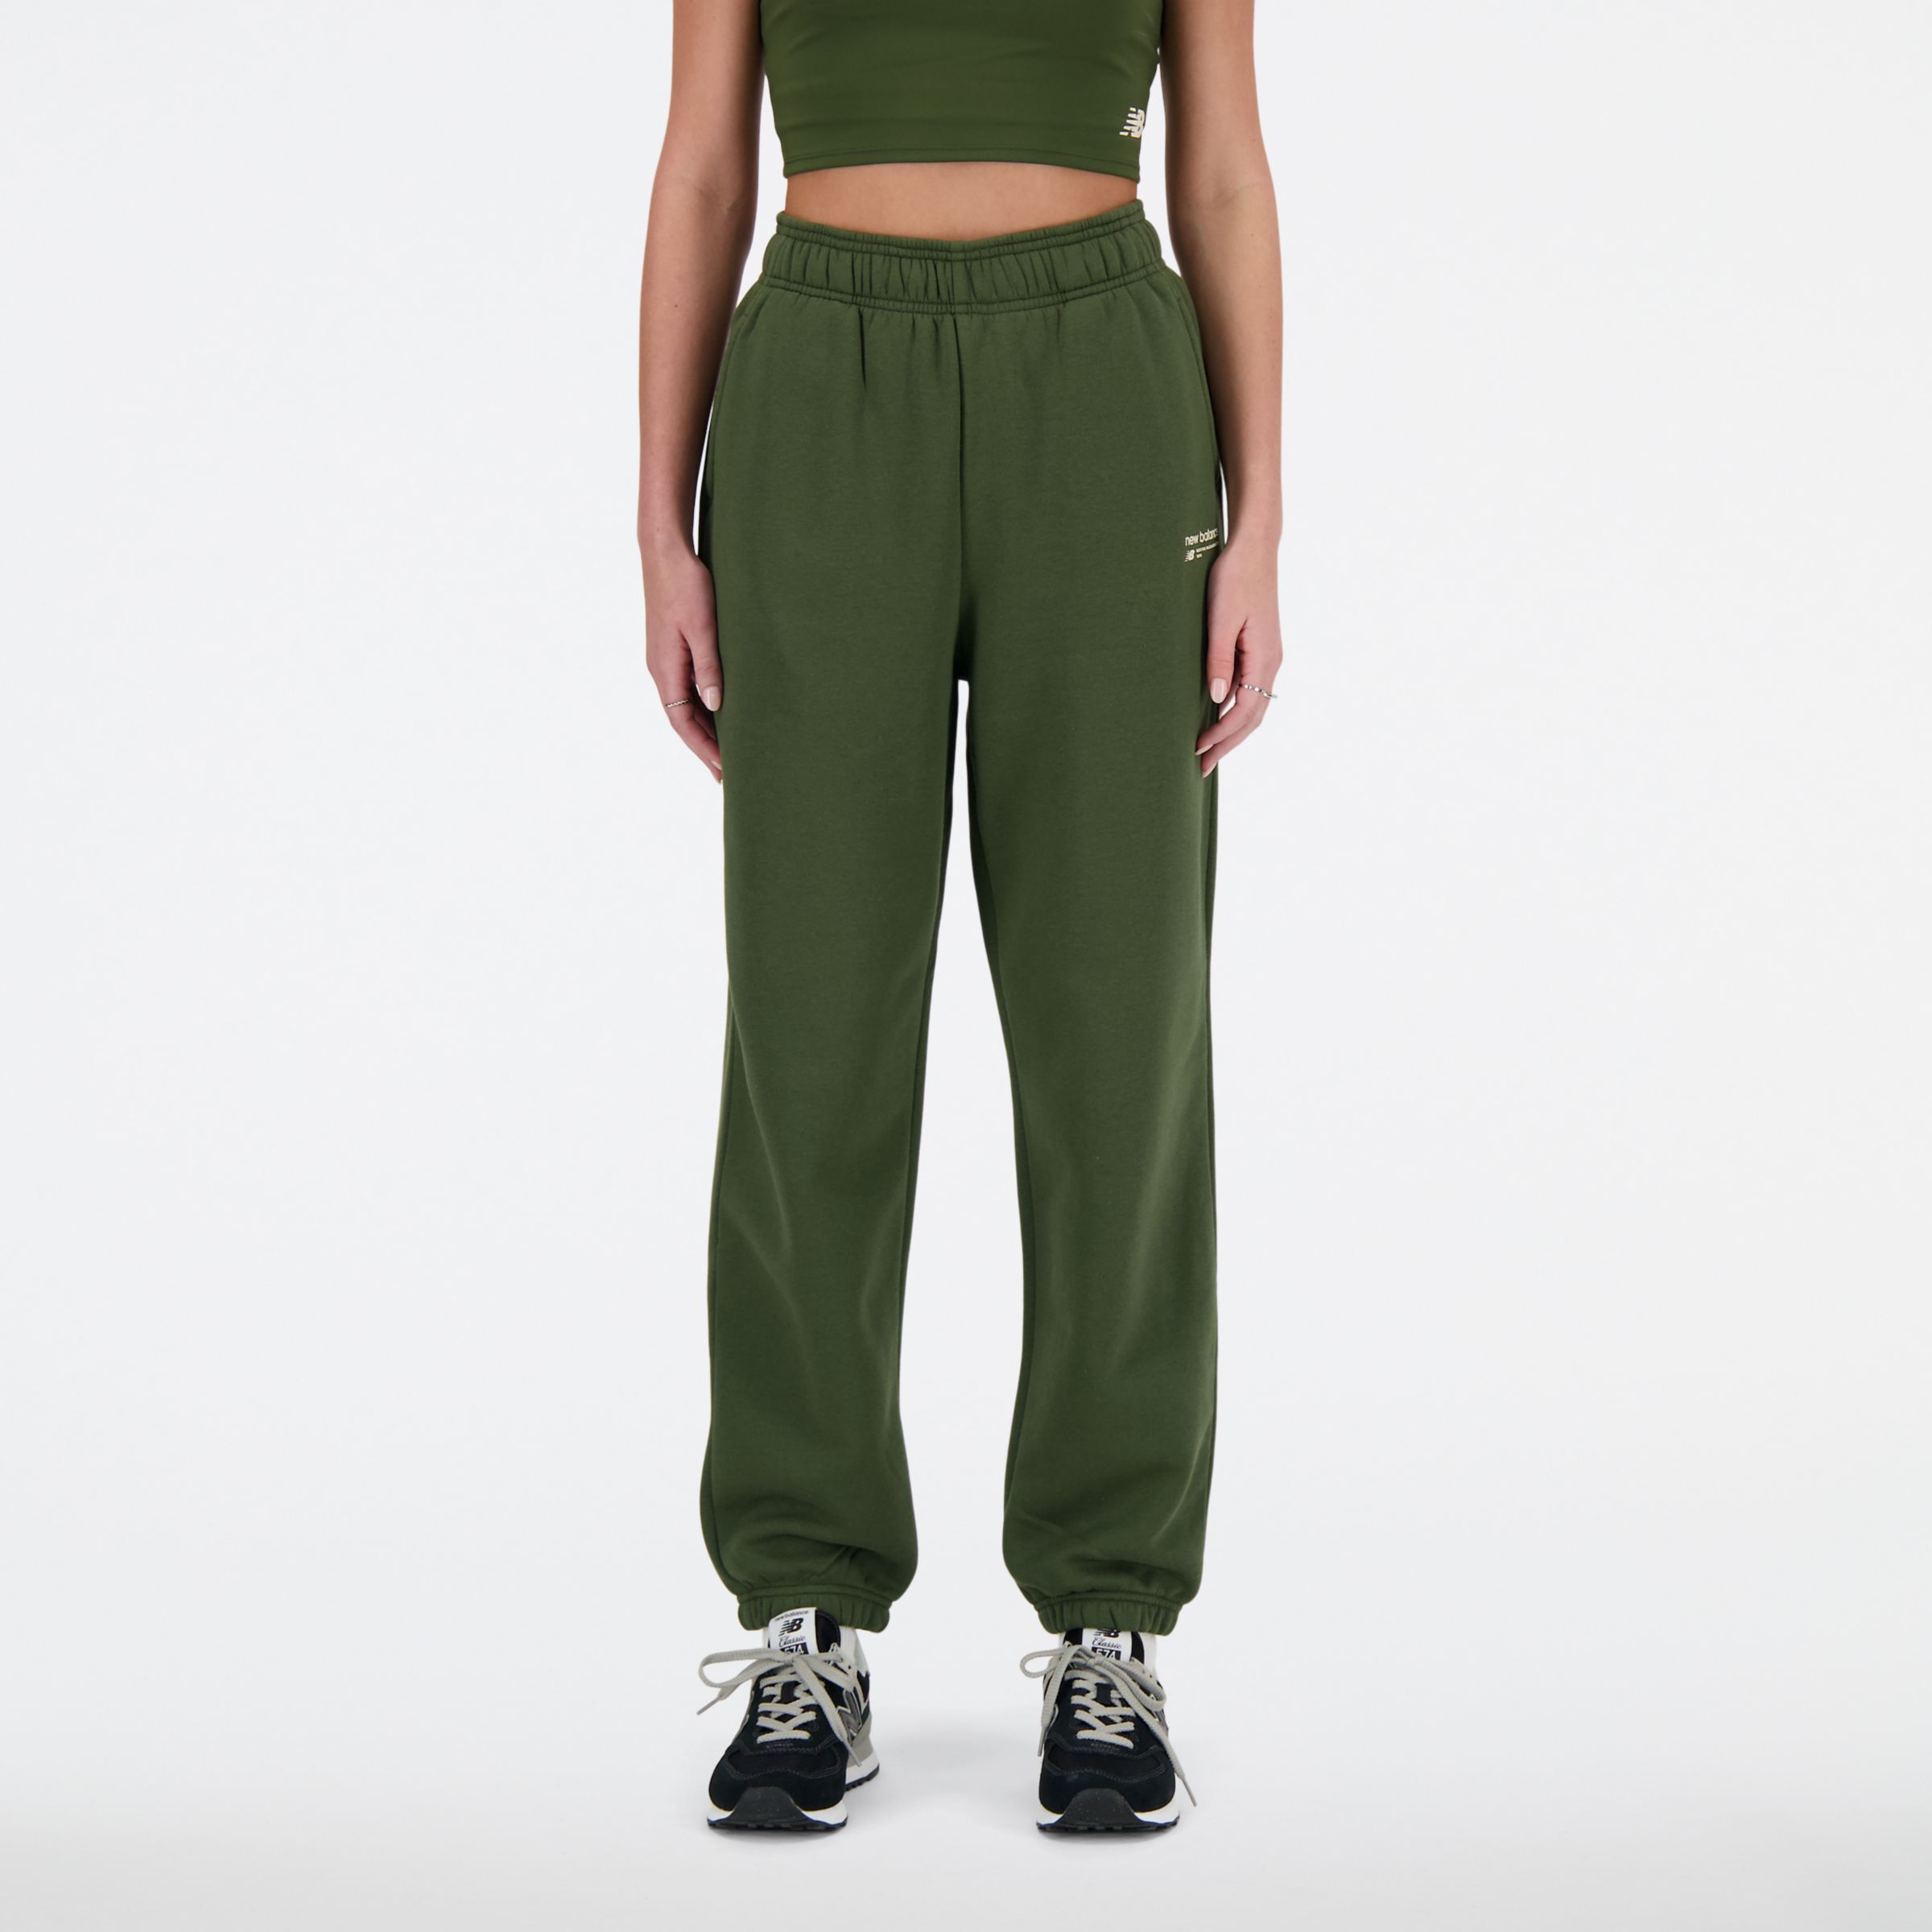 Whyessa - Drawstring Waist Embroidered Fleece Lined Jogger Pants